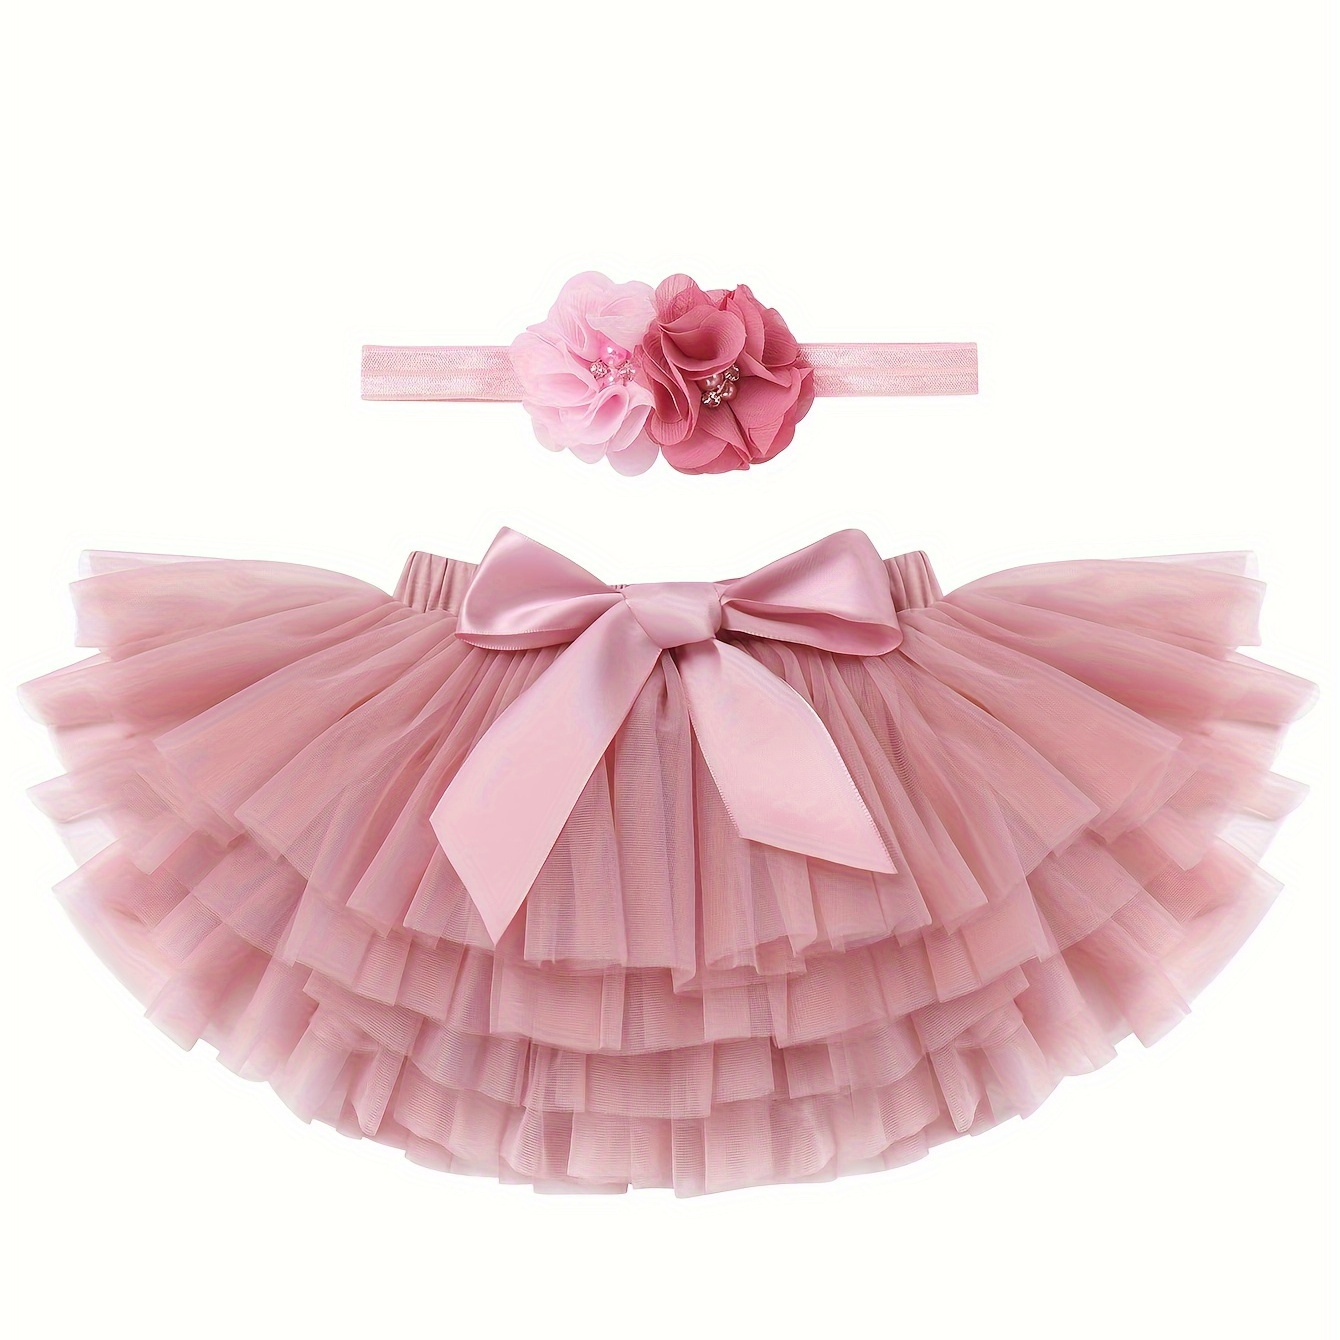 

Baby Girl's Tulle Tutu Skirt Diaper Cover With Headband For Photoshoot Birthday Party Outfits 6-12 Moths